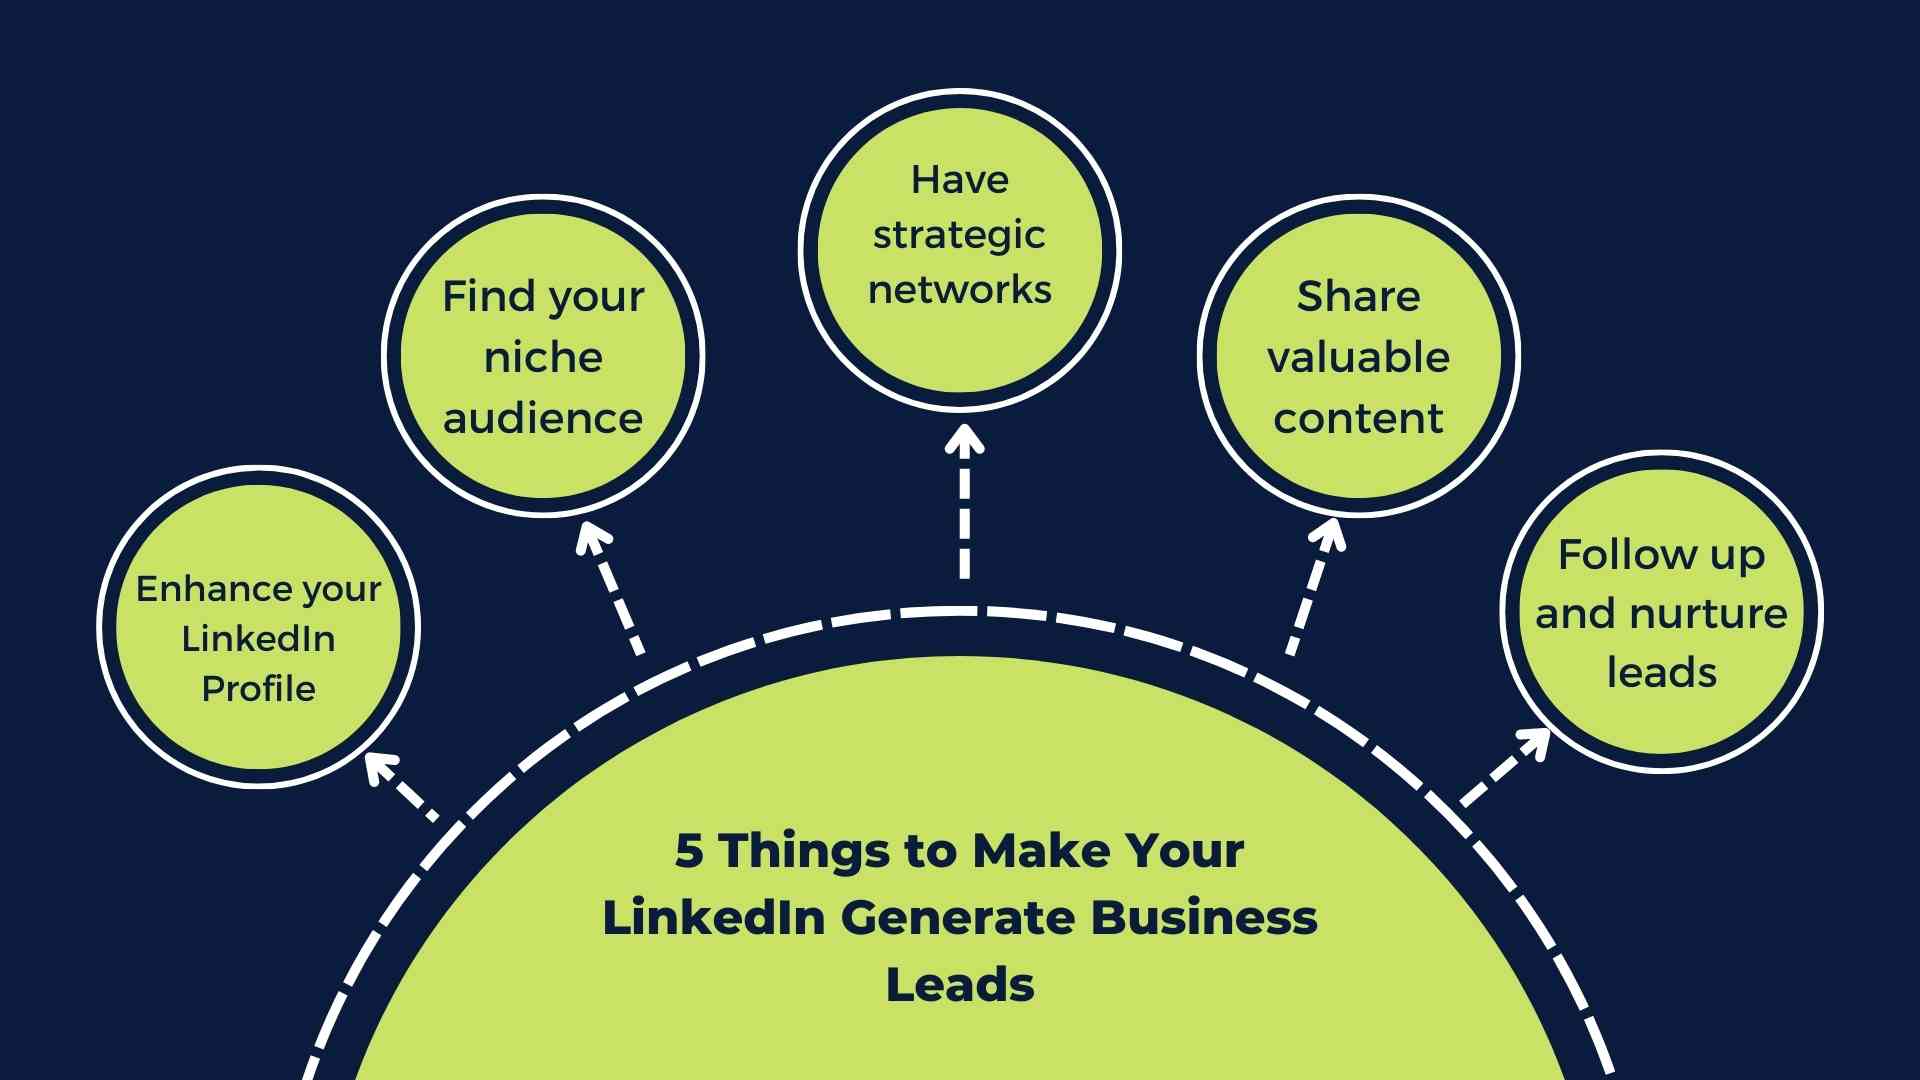 Infographic showing the best things for generating LinkedIn leads 